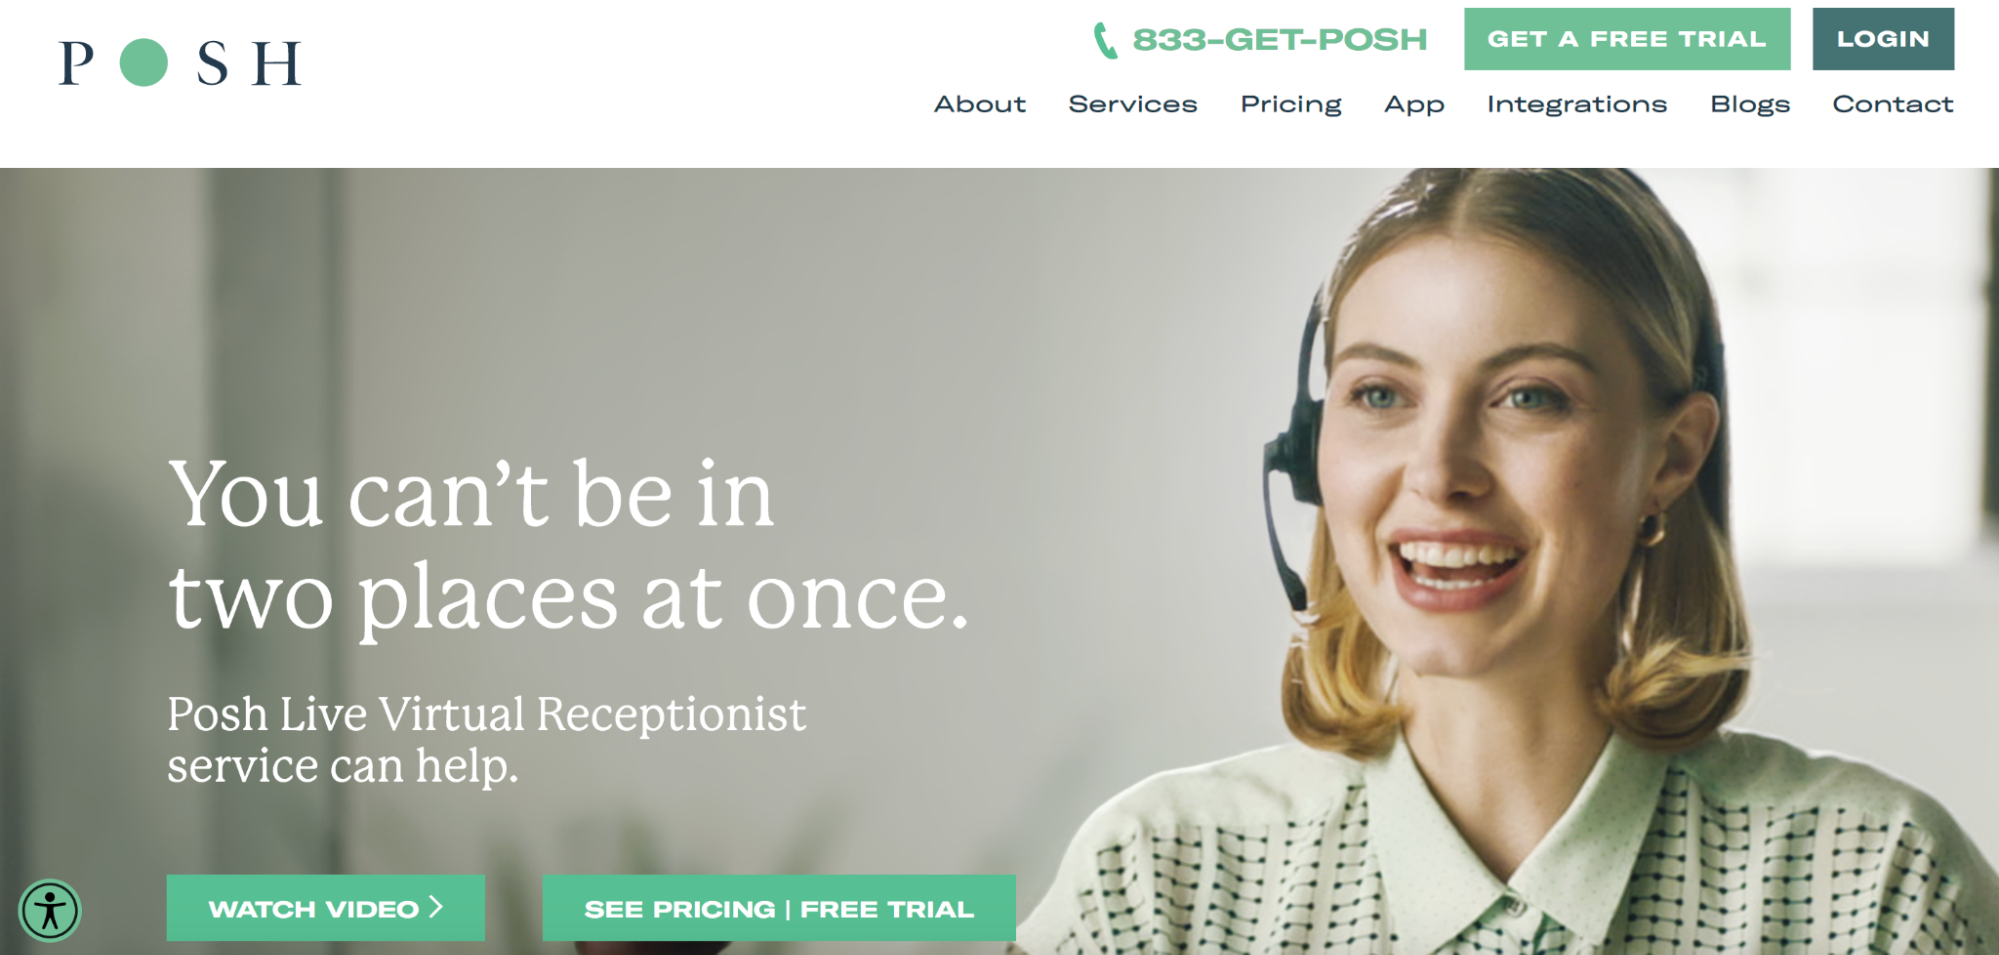 Screenshot of the Posh homepage, one of the best virtual receptionist services for small business.